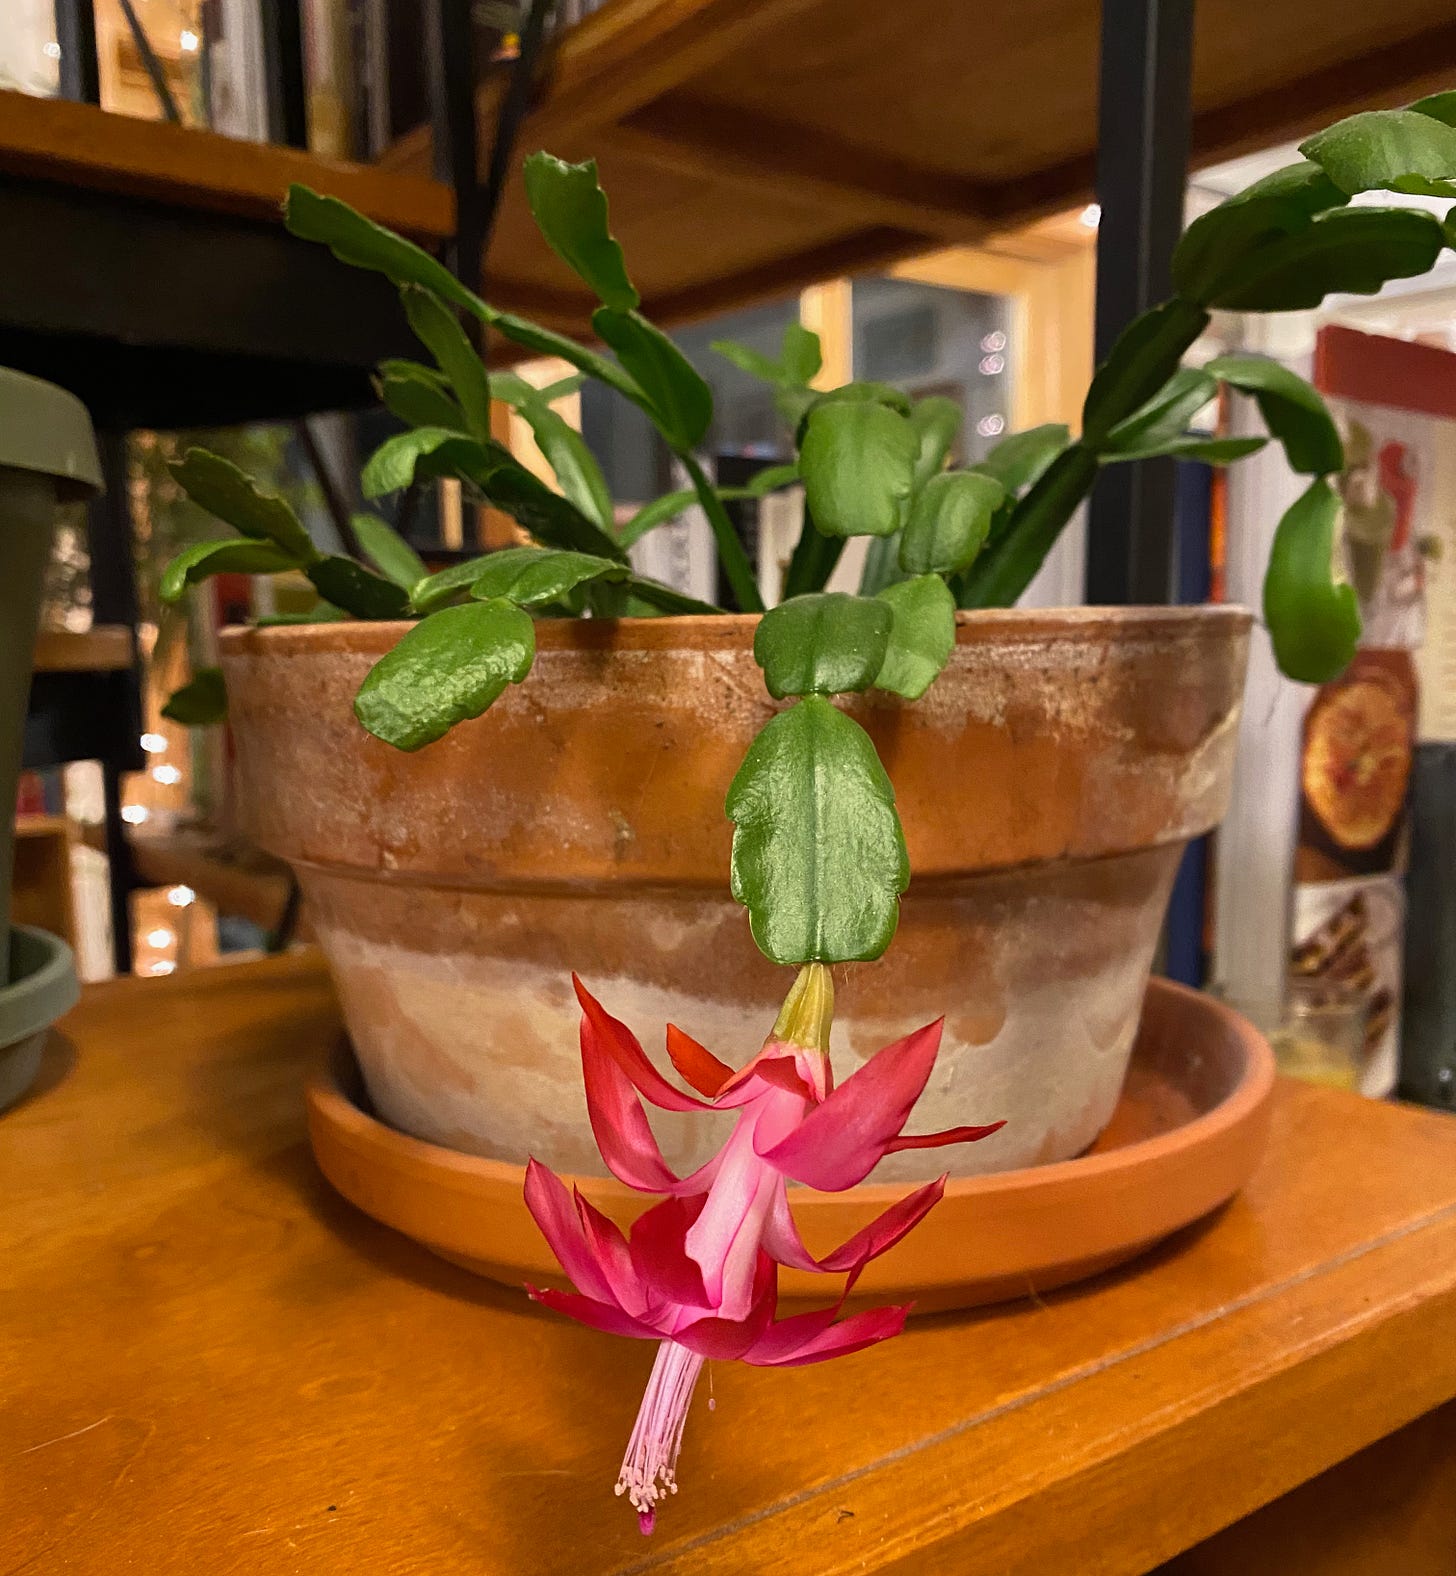 A small Christmas cactus in a terracotta pot with one bright pink bloom.